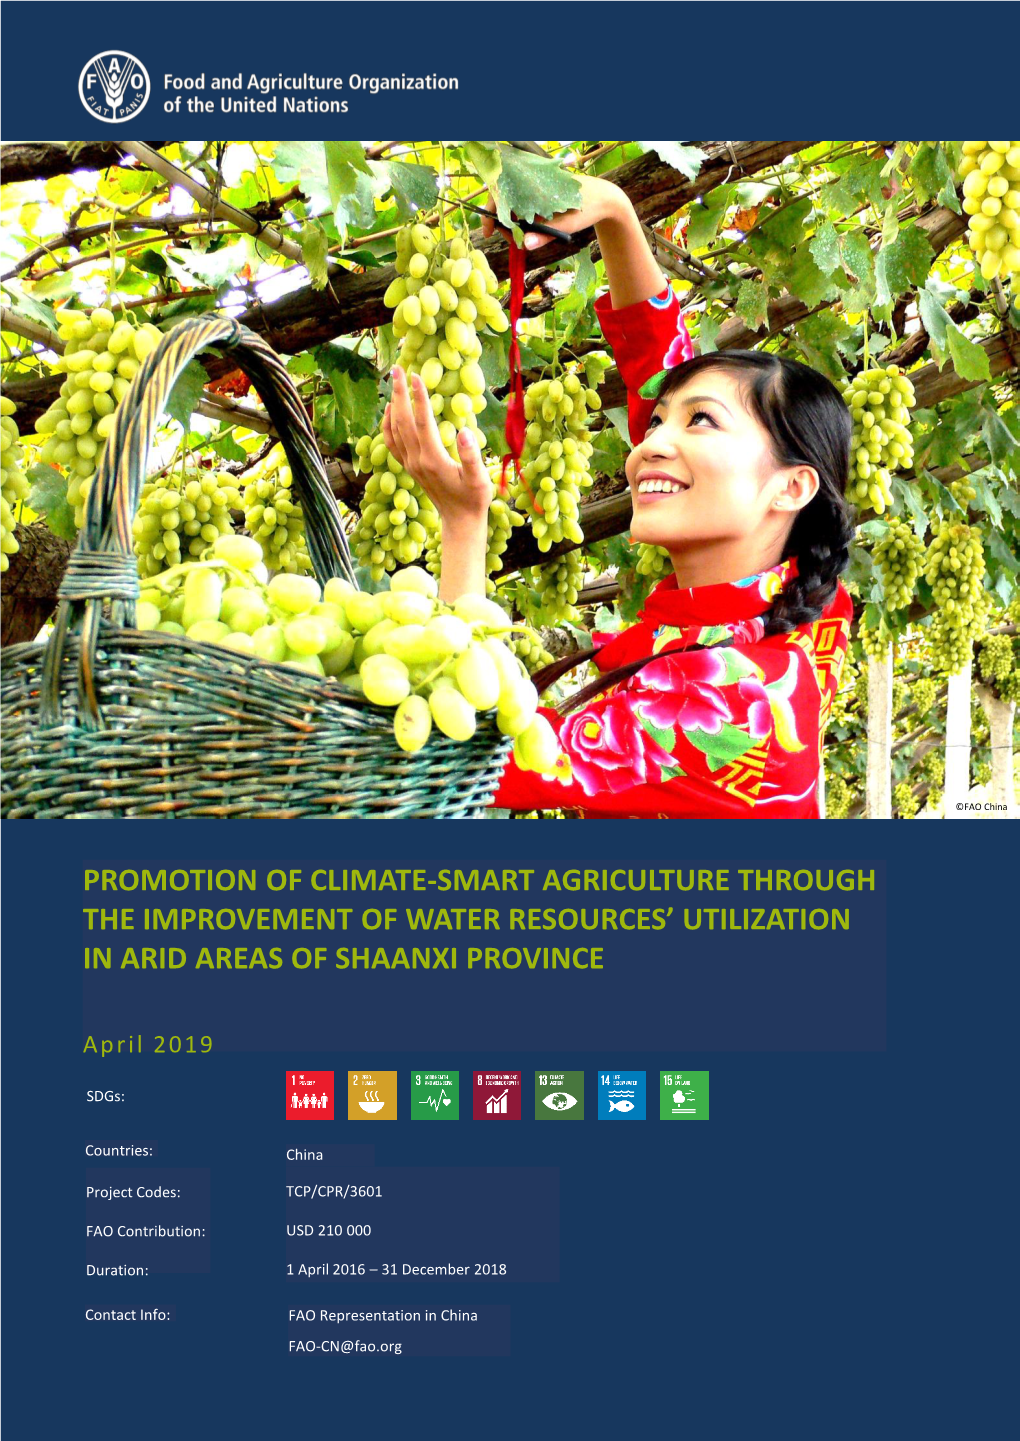 Promotion of Climate-Smart Agriculture Through the Improvement of Water Resources’ Utilization in Arid Areas of Shaanxi Province